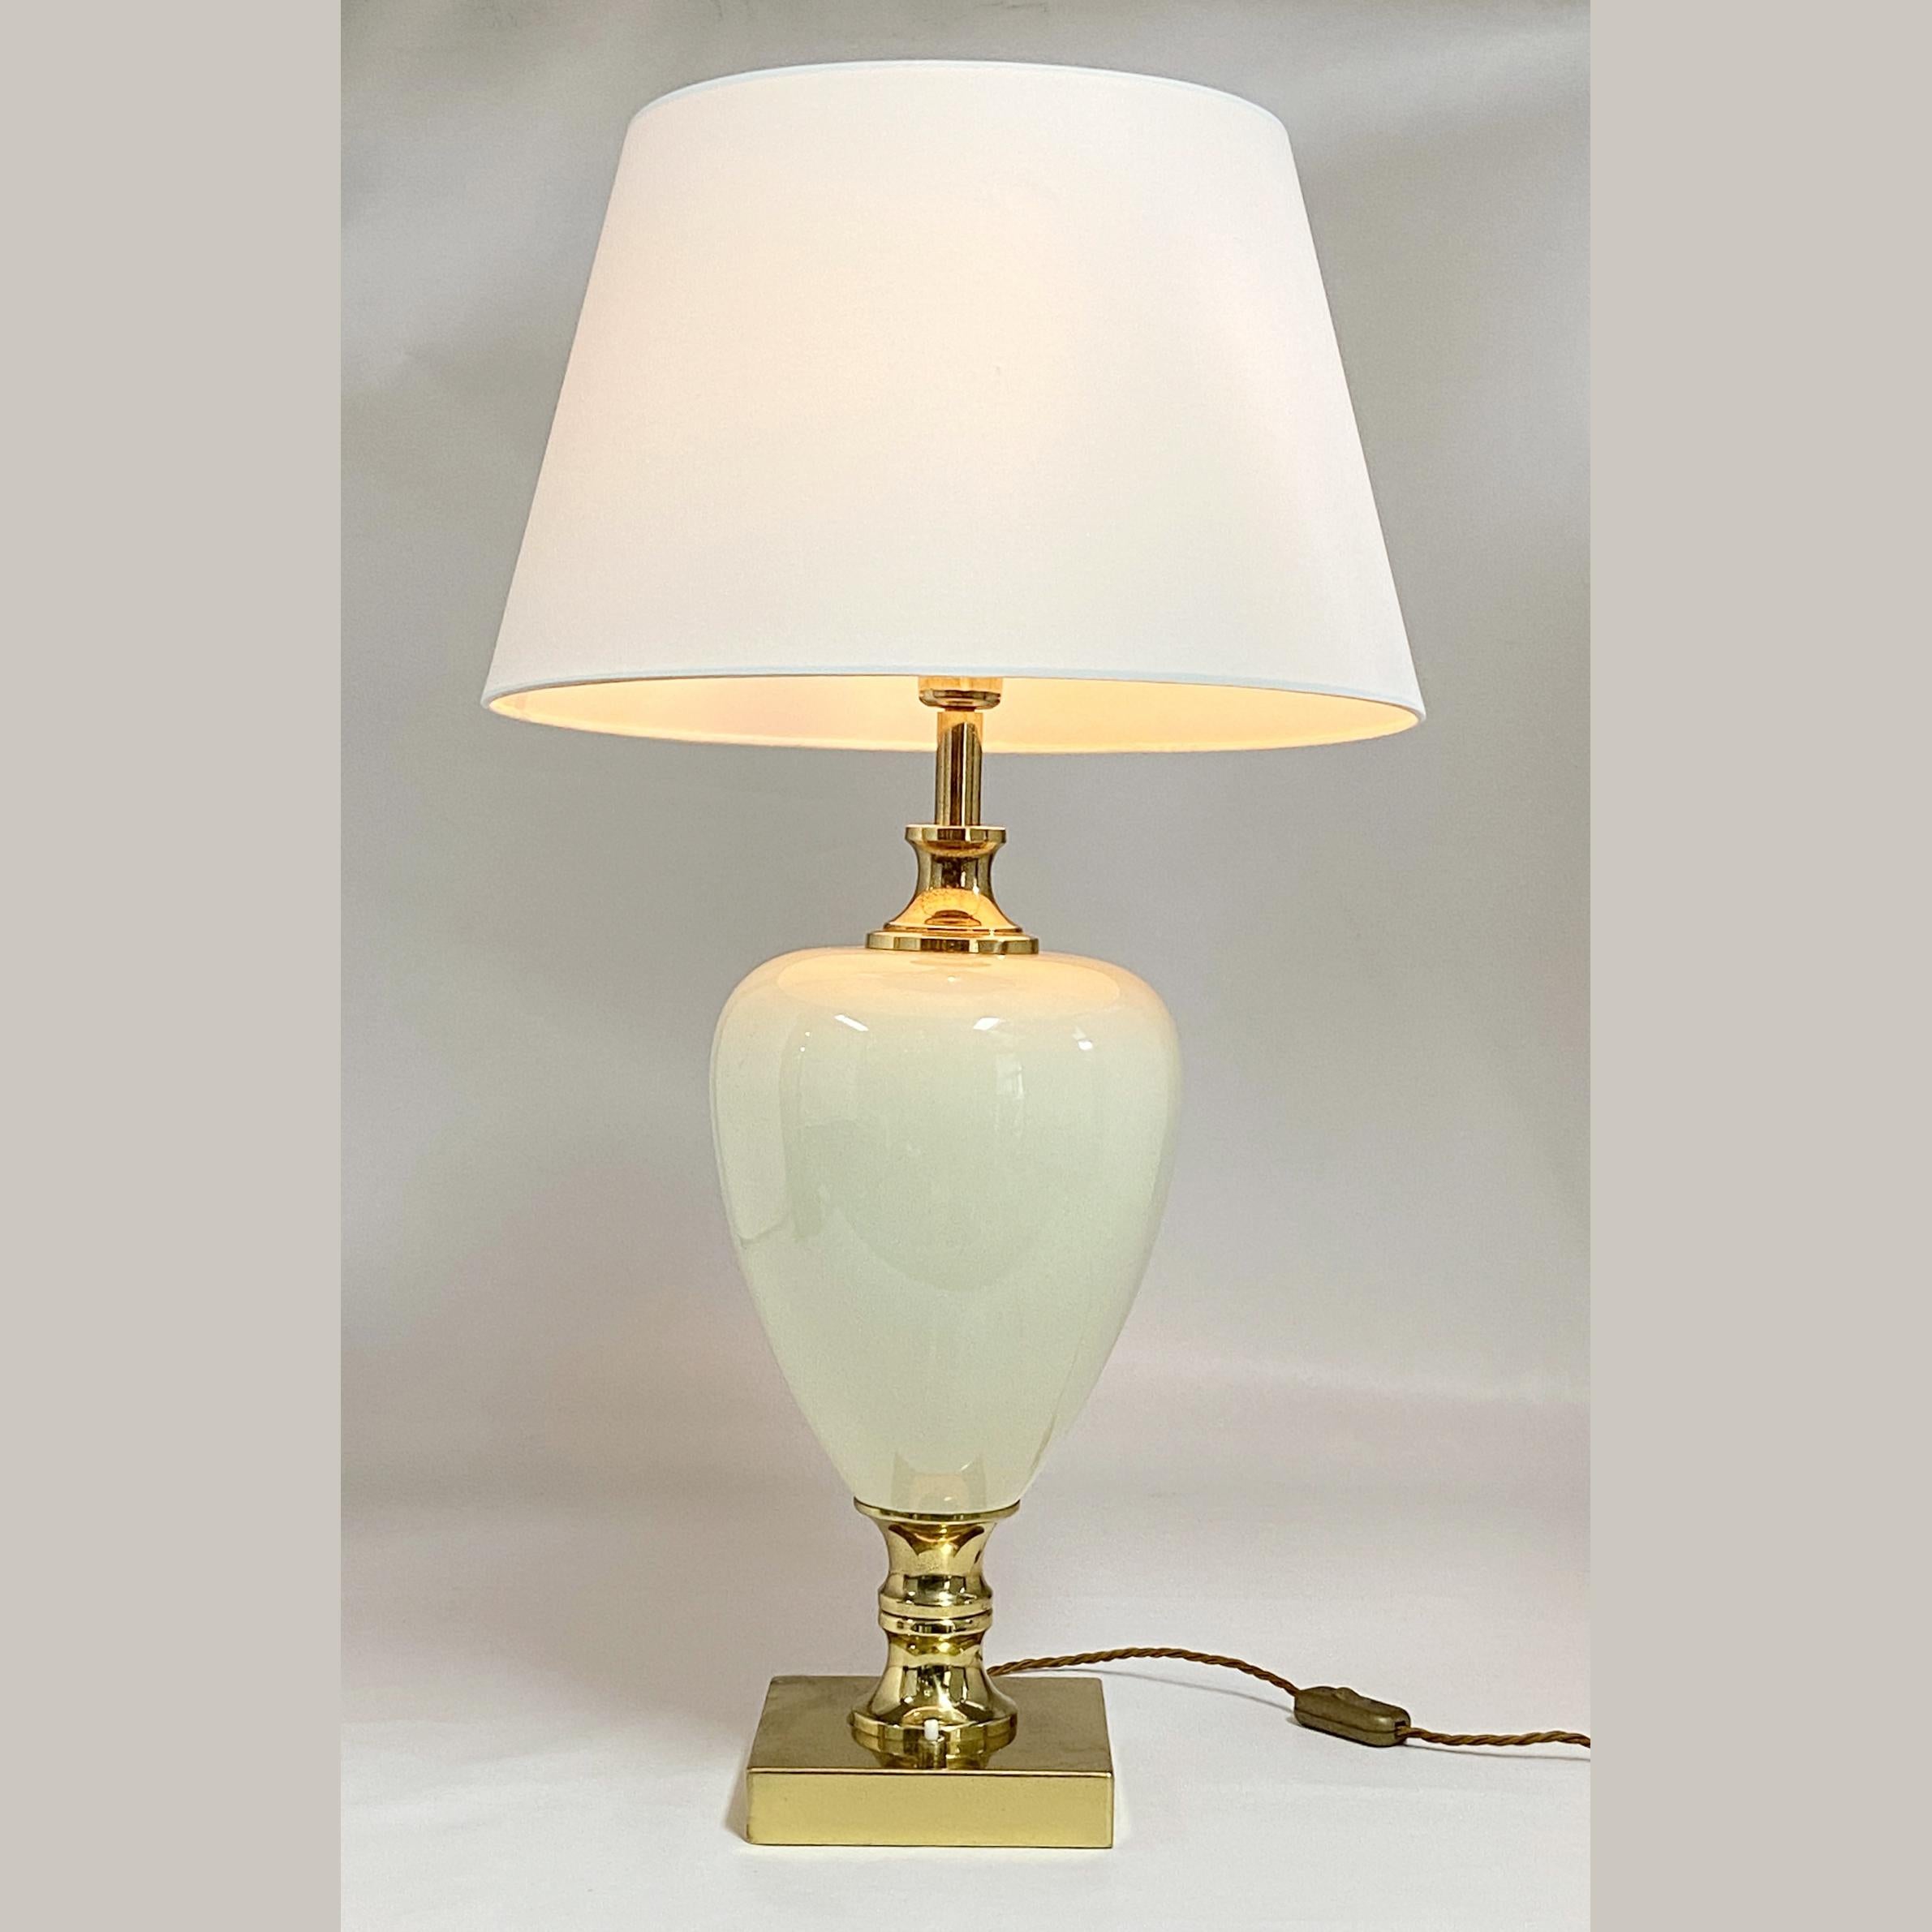 Pair of Cream Porcelain and Brass Table Lamps by Zonca, Italy, 1970s For Sale 2